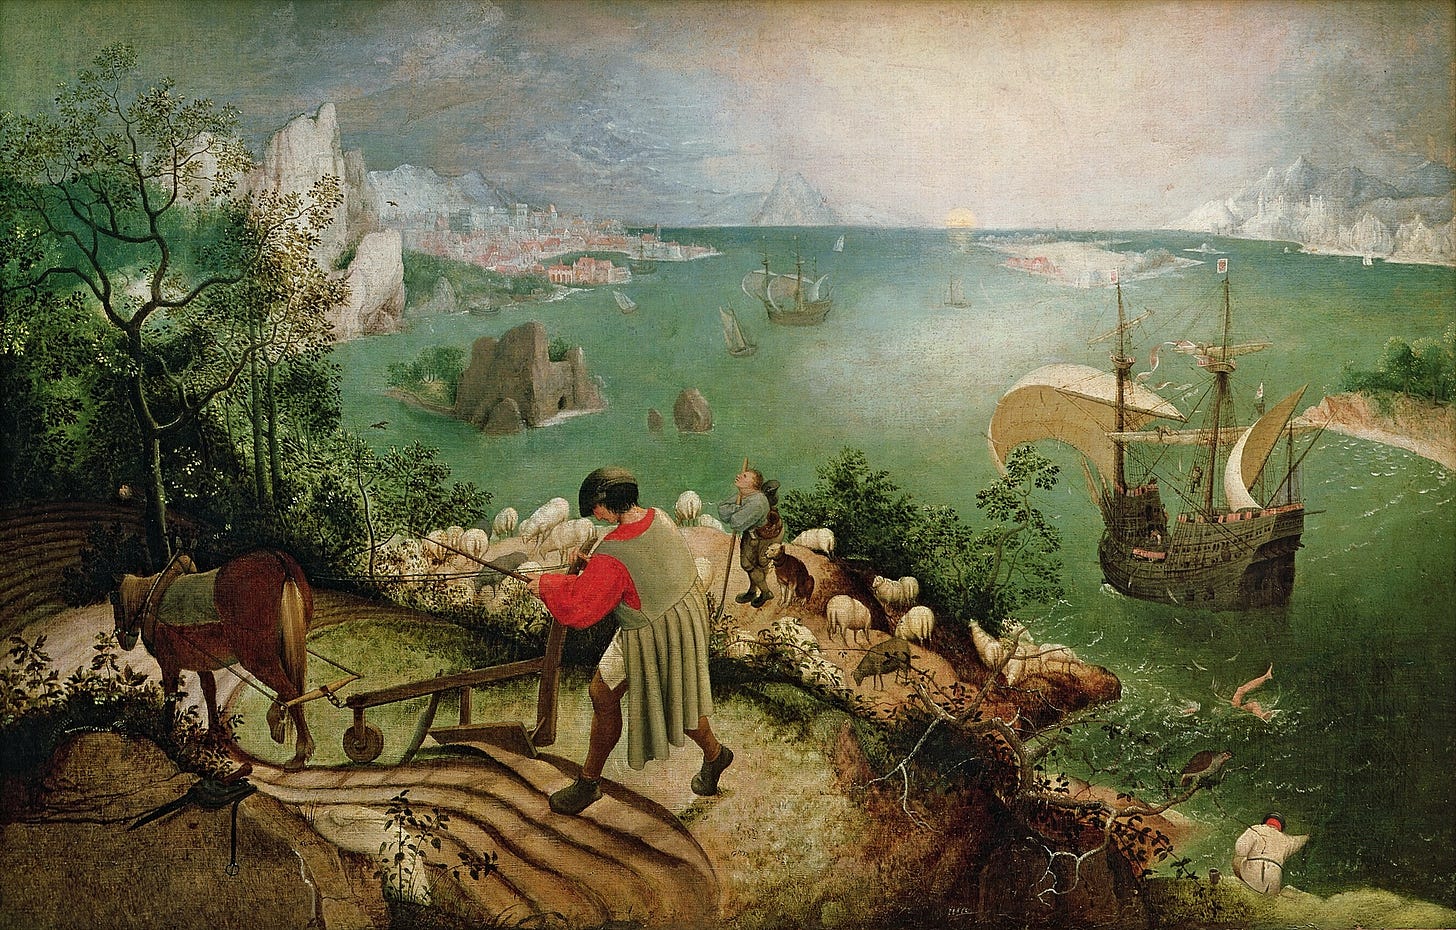 A picturesque painting of a hilltop with people, animals, and boats in the background.